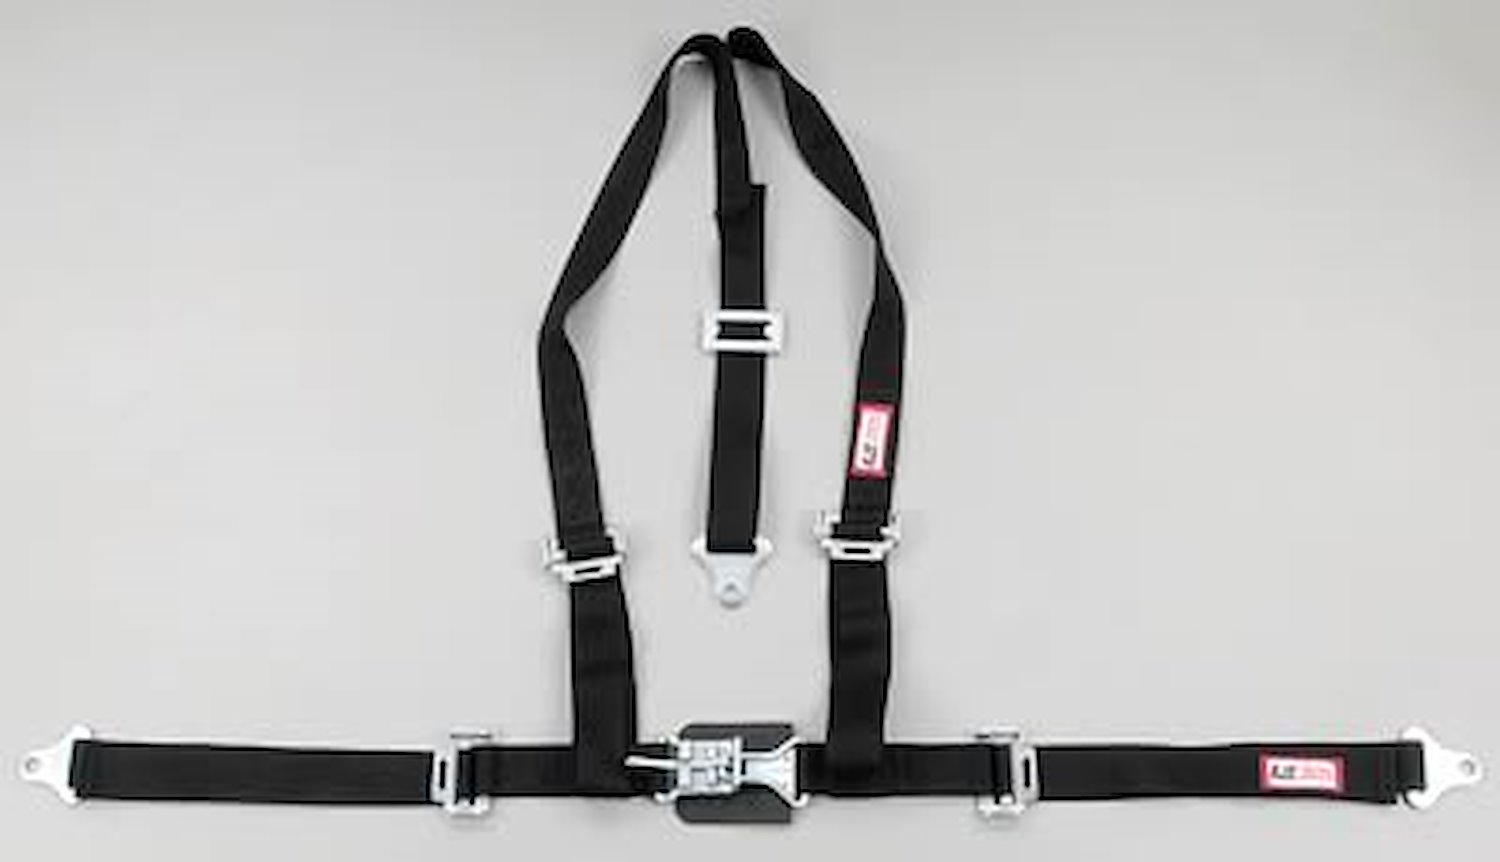 NON-SFI L&L HARNESS 2 PULL DOWN Lap Belt SNAP SEWN IN 2 S.H. Y FLOOR Mount WRAP/BOLT HOT PINK